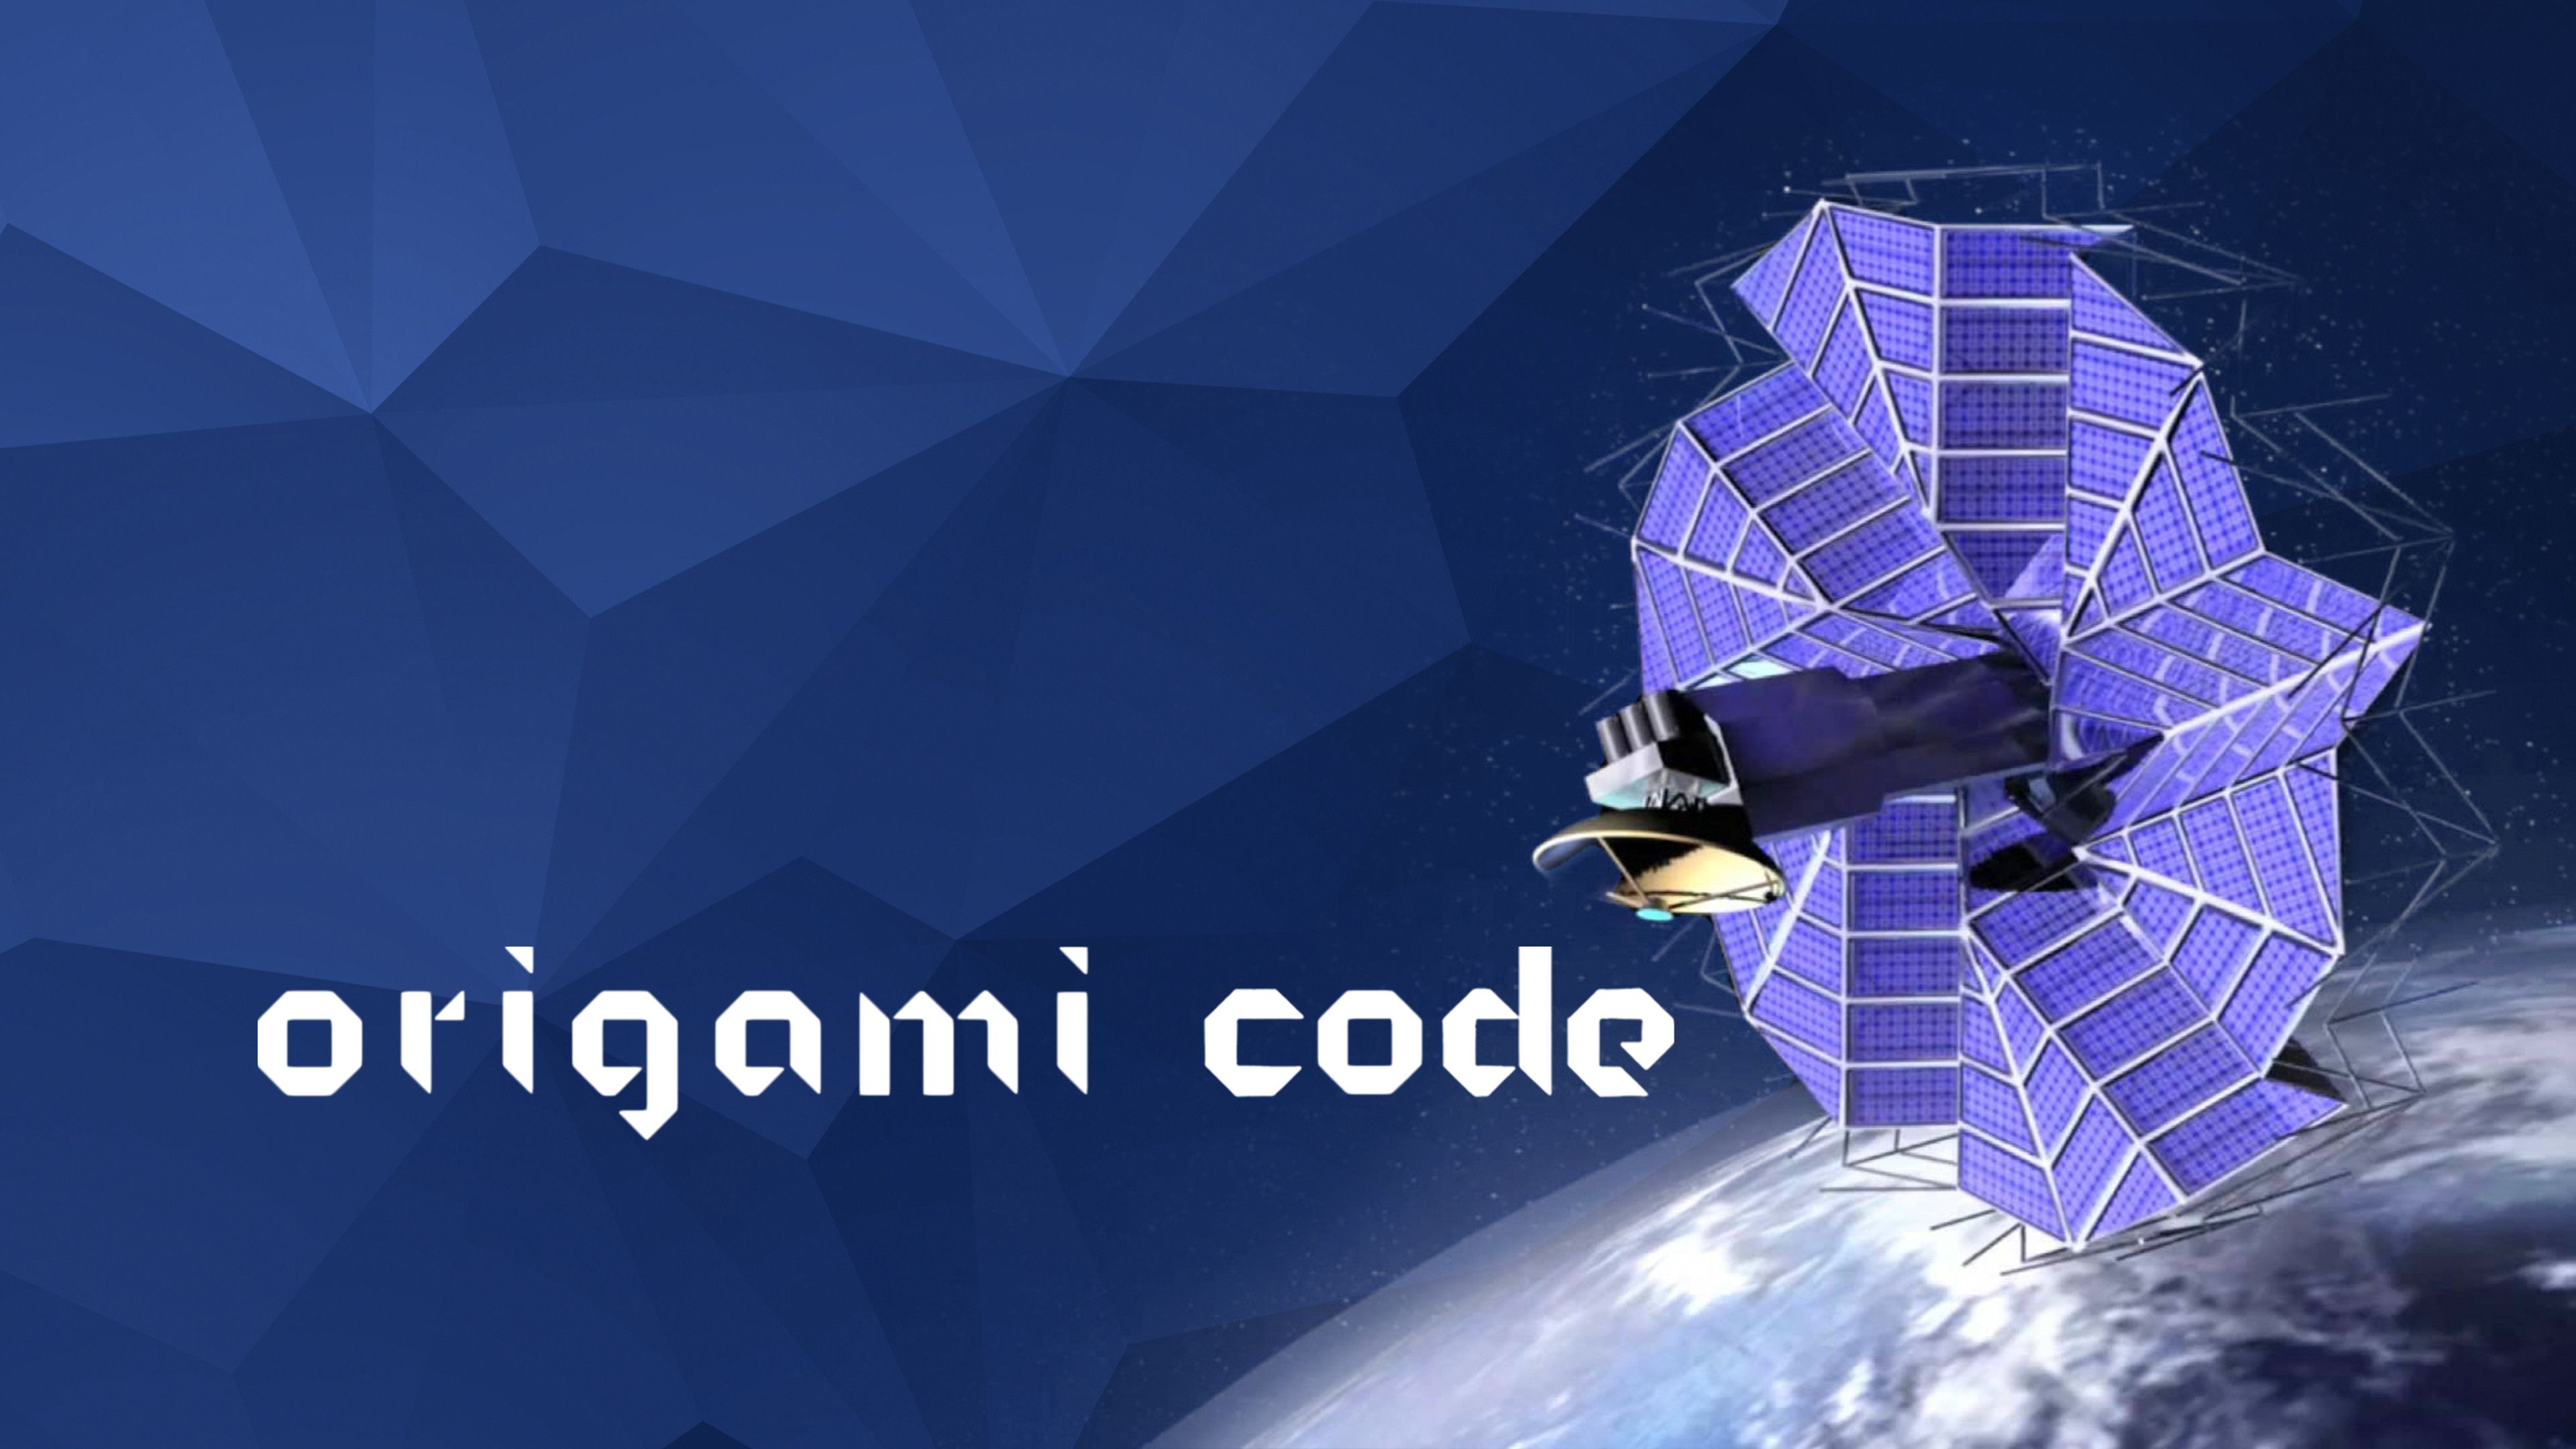 The Origami Code